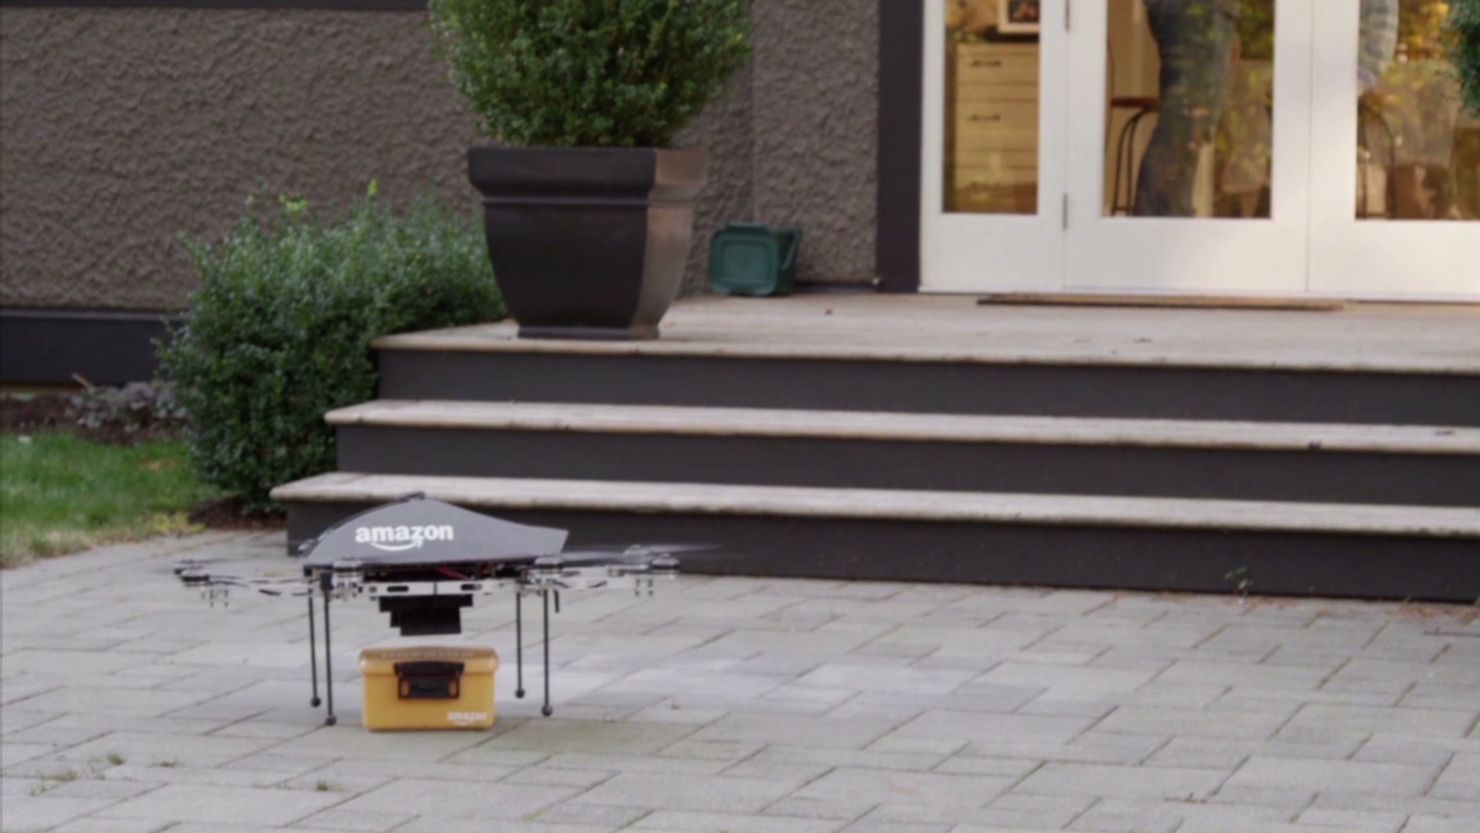 vo amazon drone delivery system_00005818.jpg